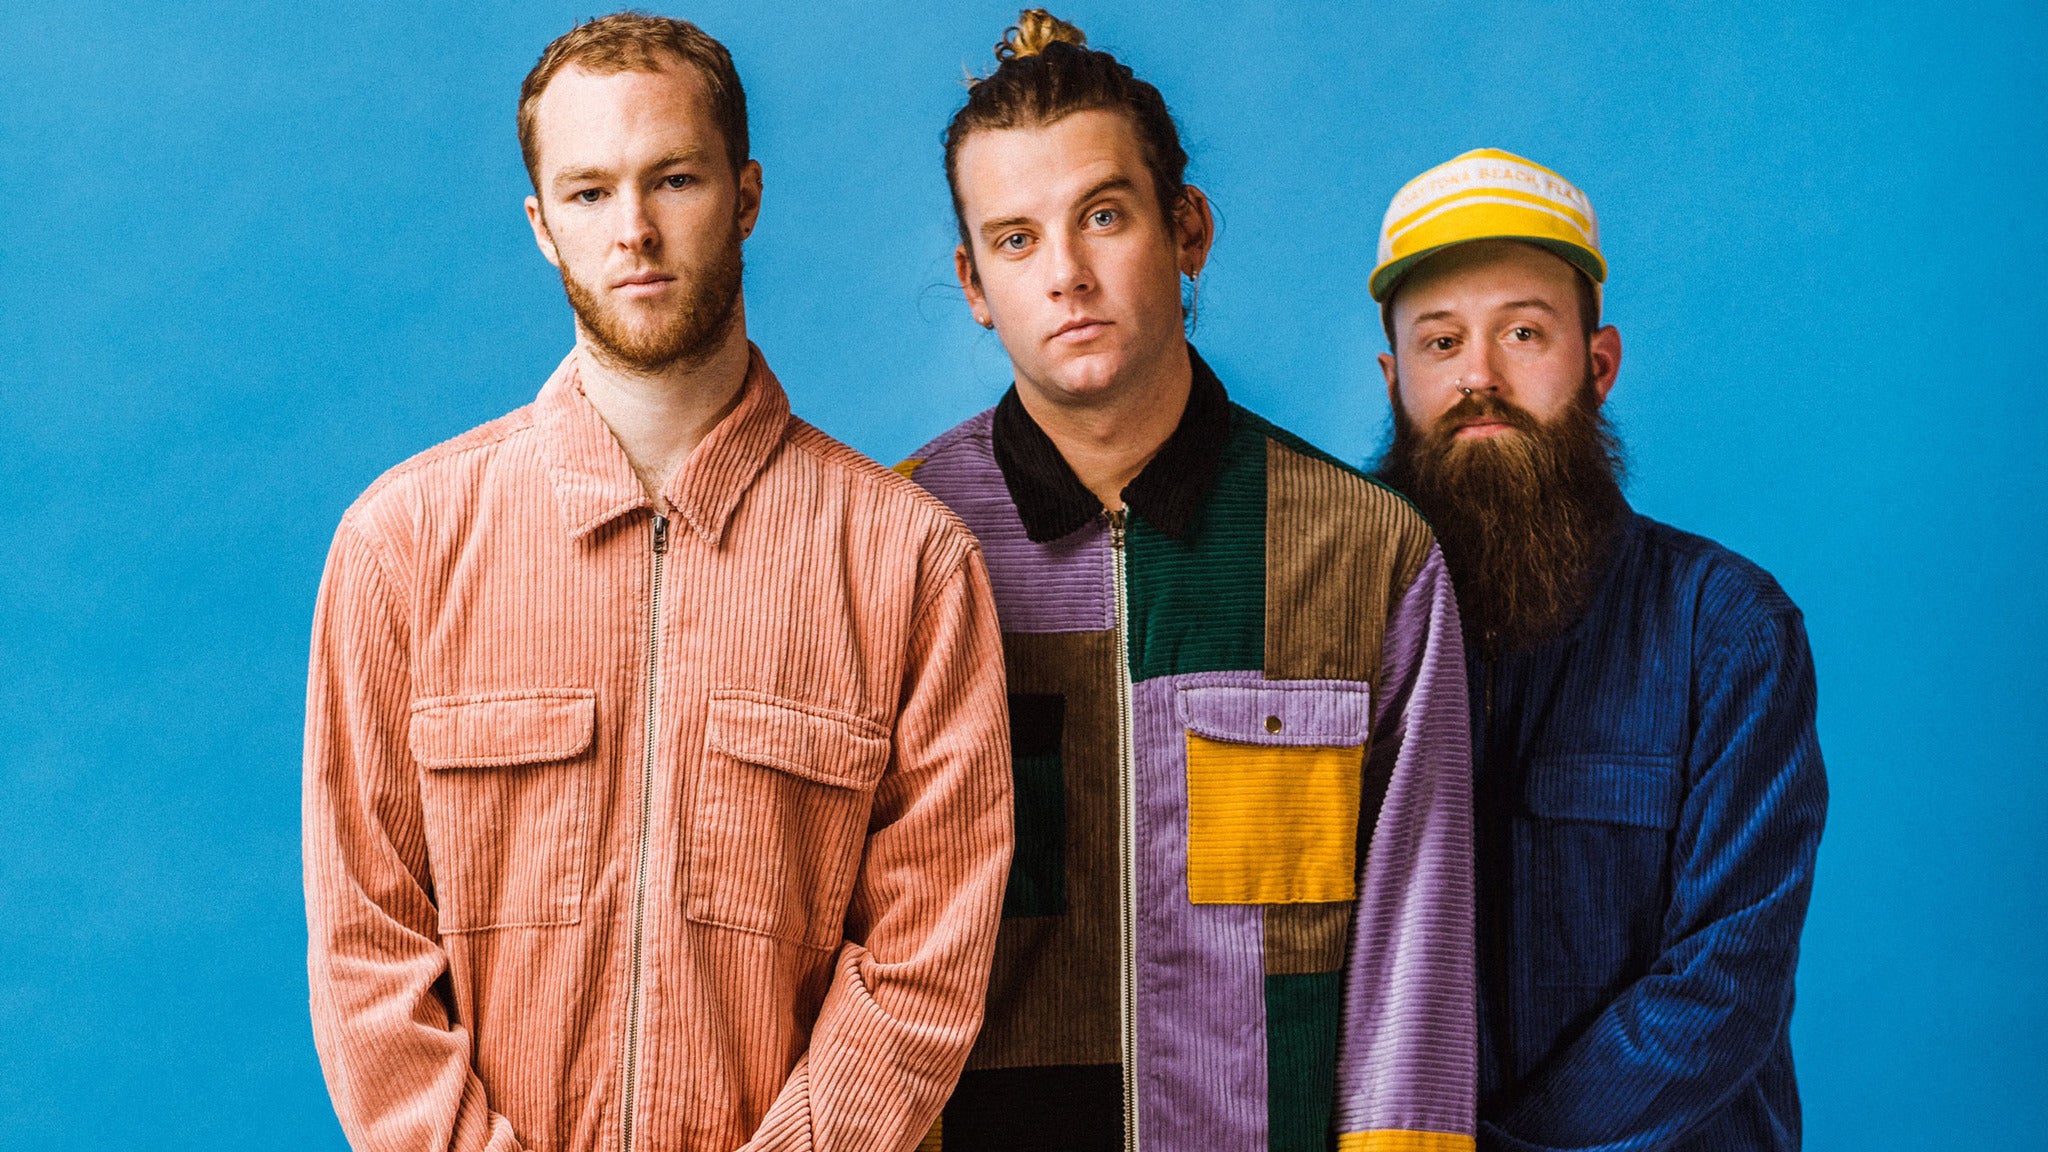 Judah & the Lion - Going to Mars Tour in Columbus promo photo for First Entry VIP Package presale offer code